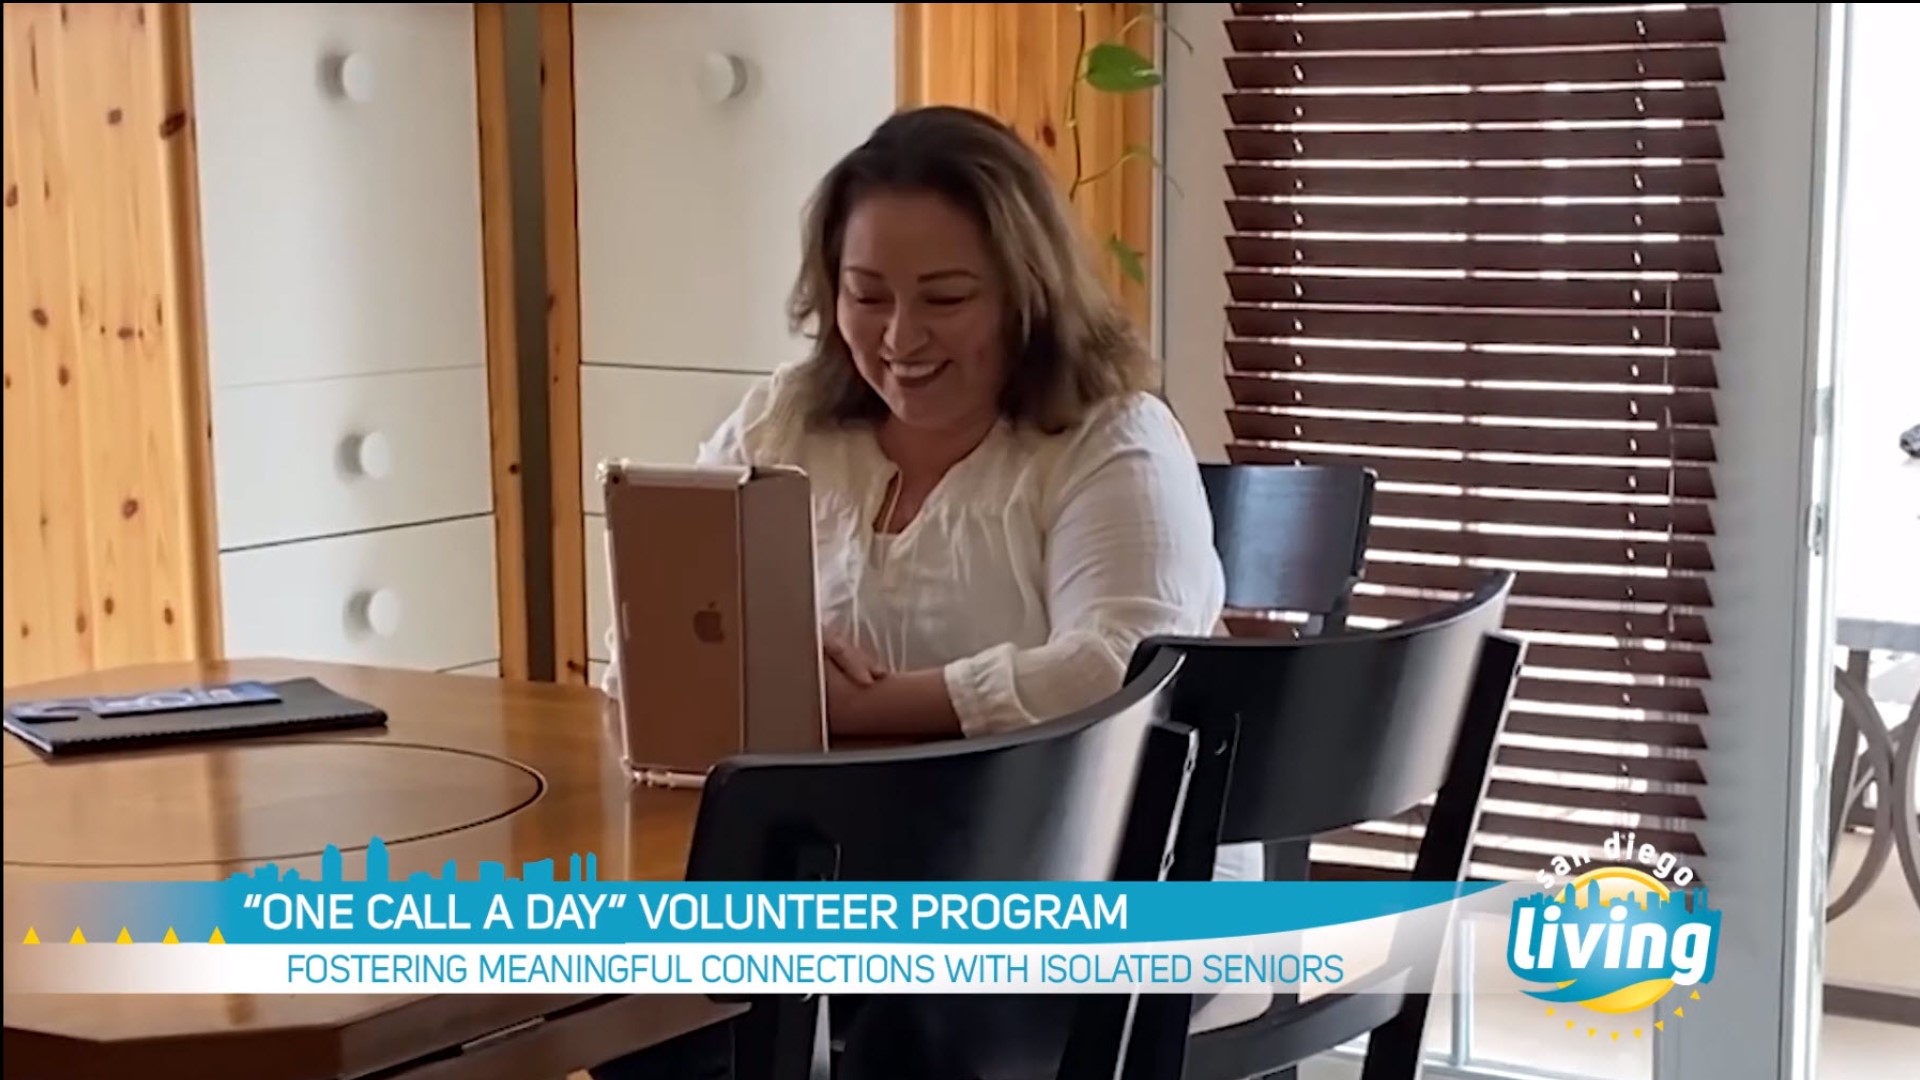 One Call A Day is a volunteer program to touch base and stay connected with struggling seniors. Segment sponsored by Cox.